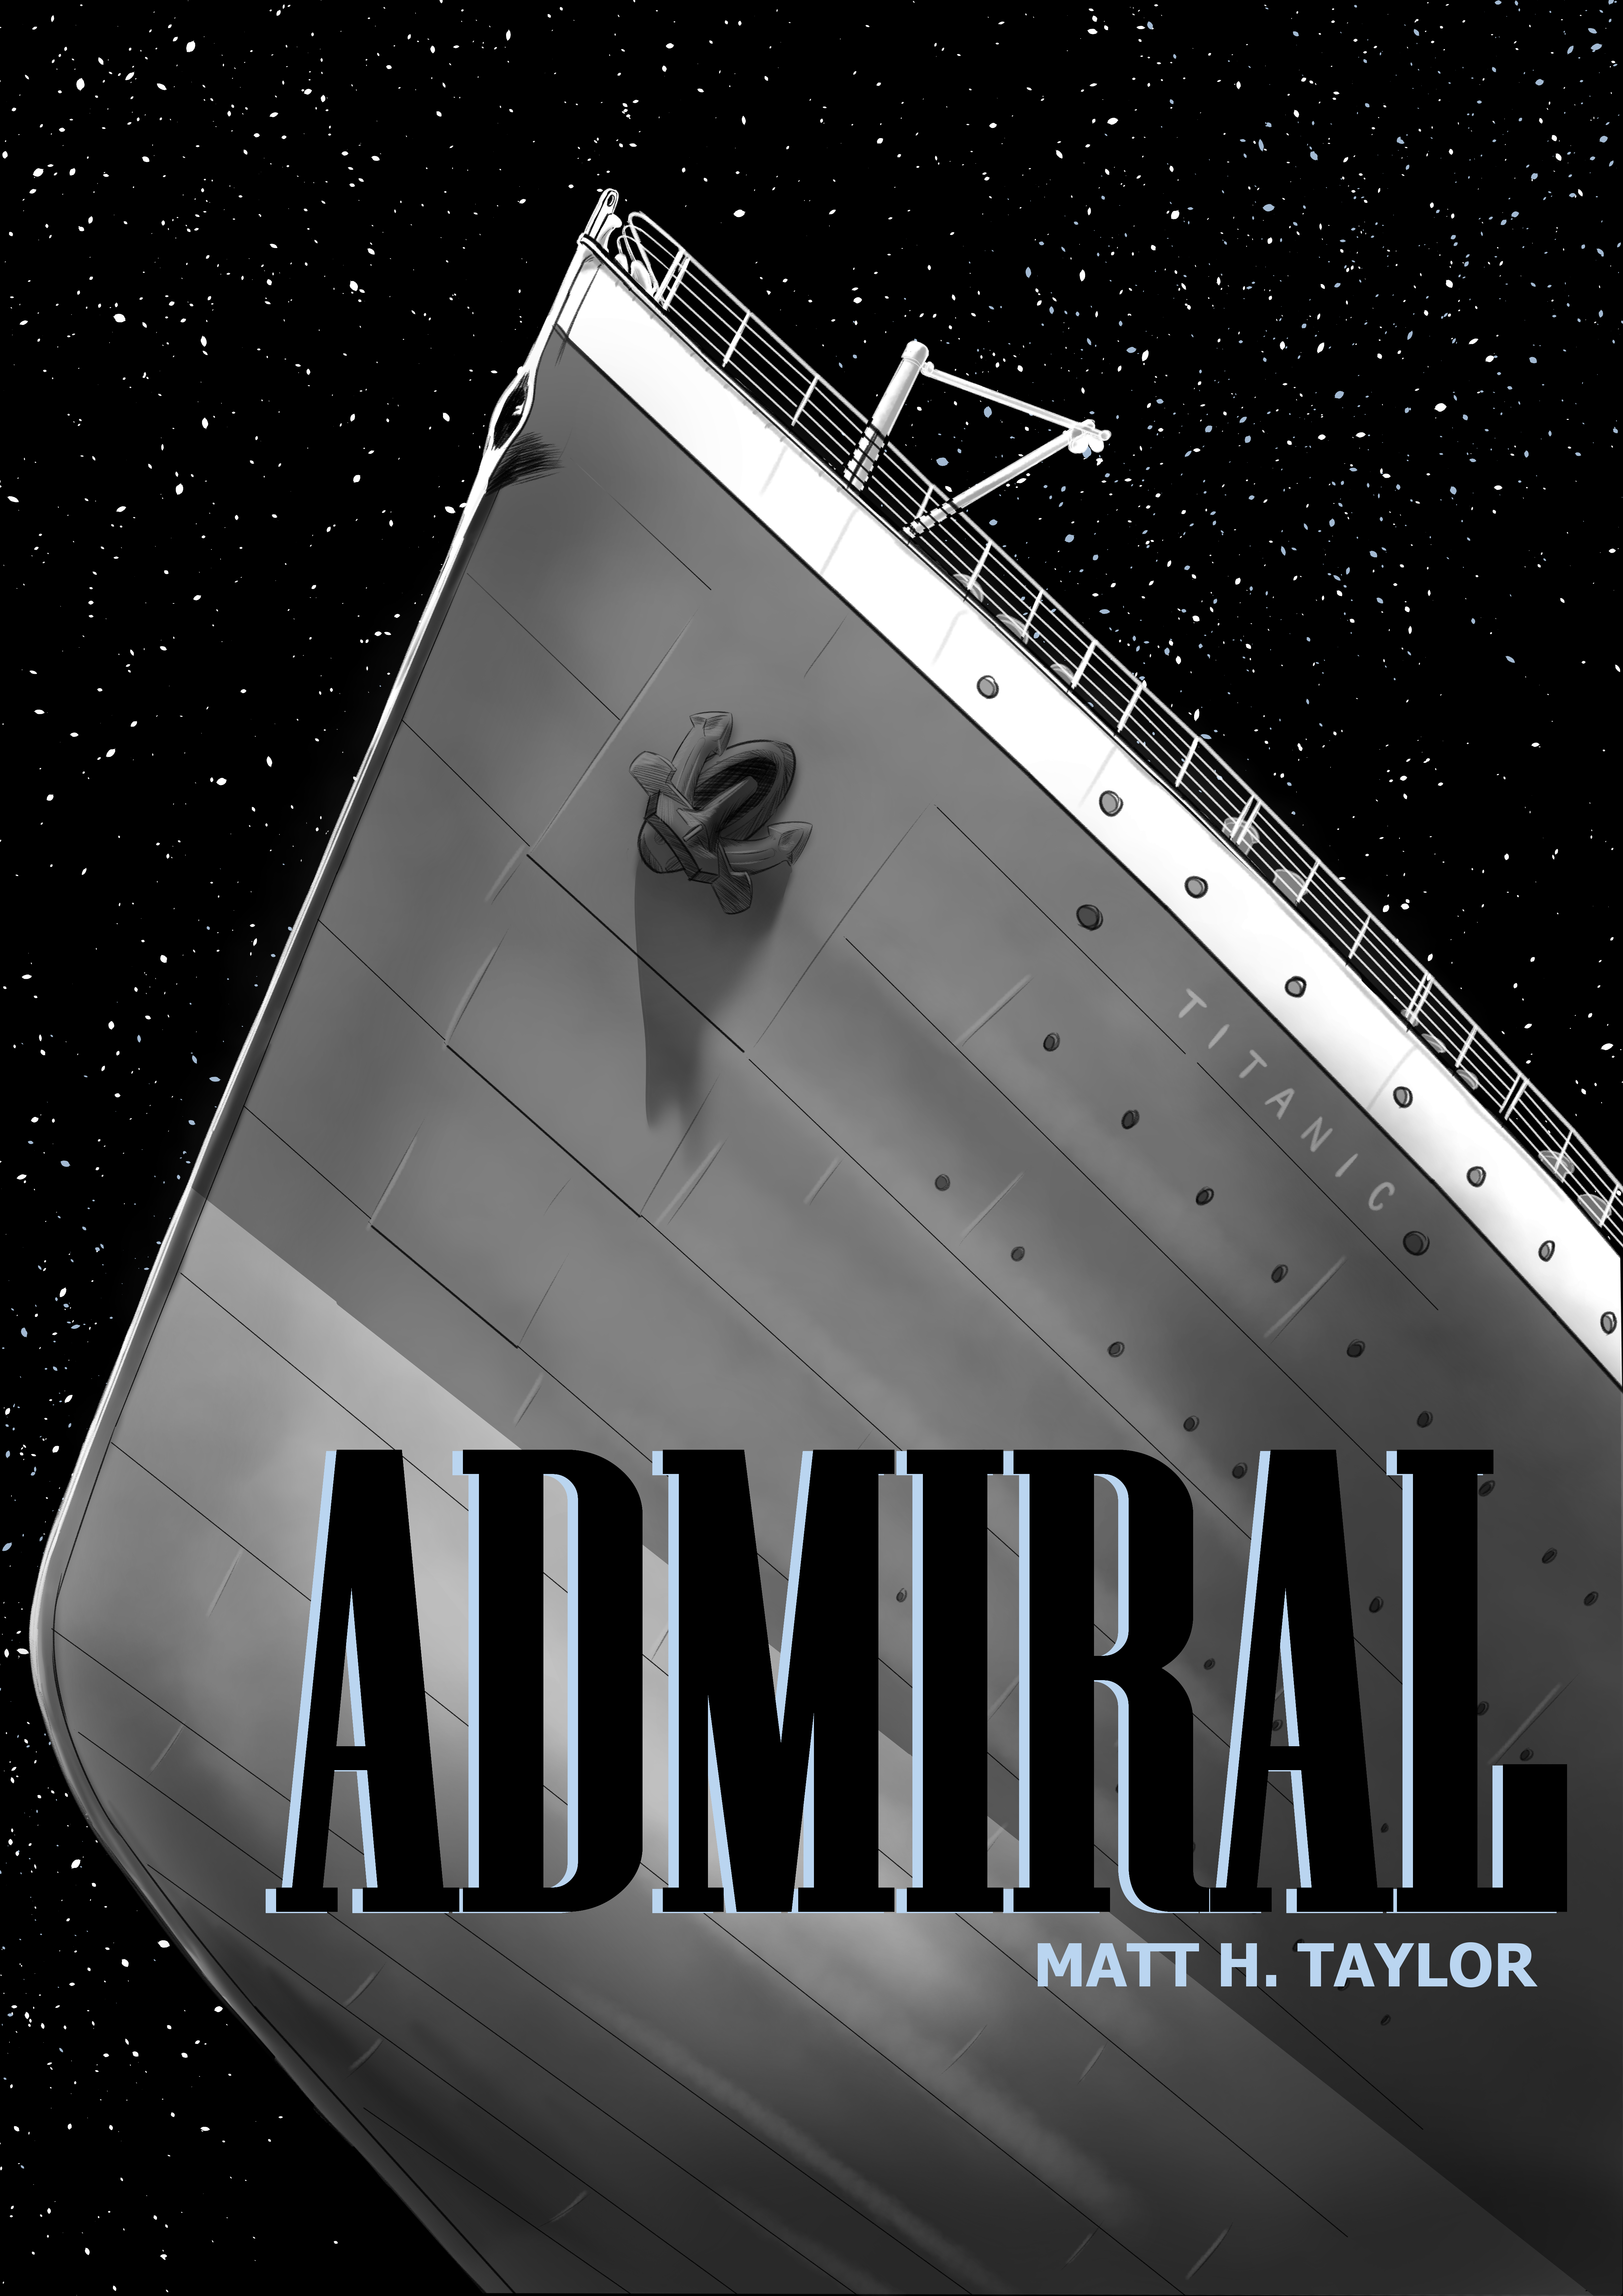 Admiral cover art